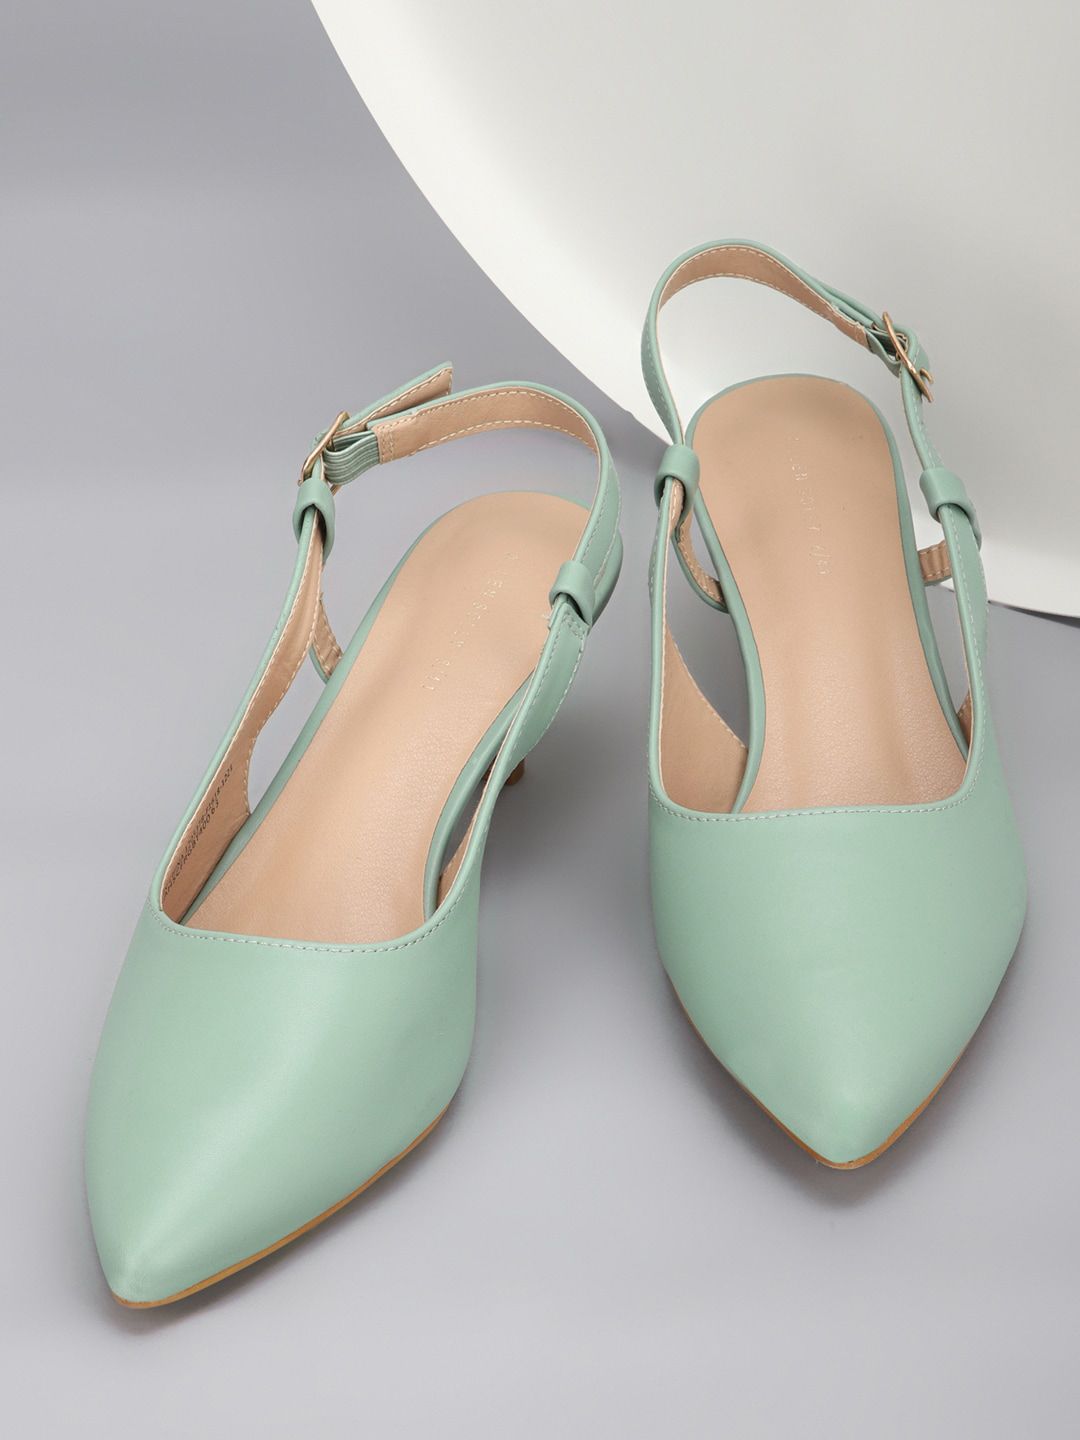 Allen Solly Woman Green PU Pumps with Buckles Price in India